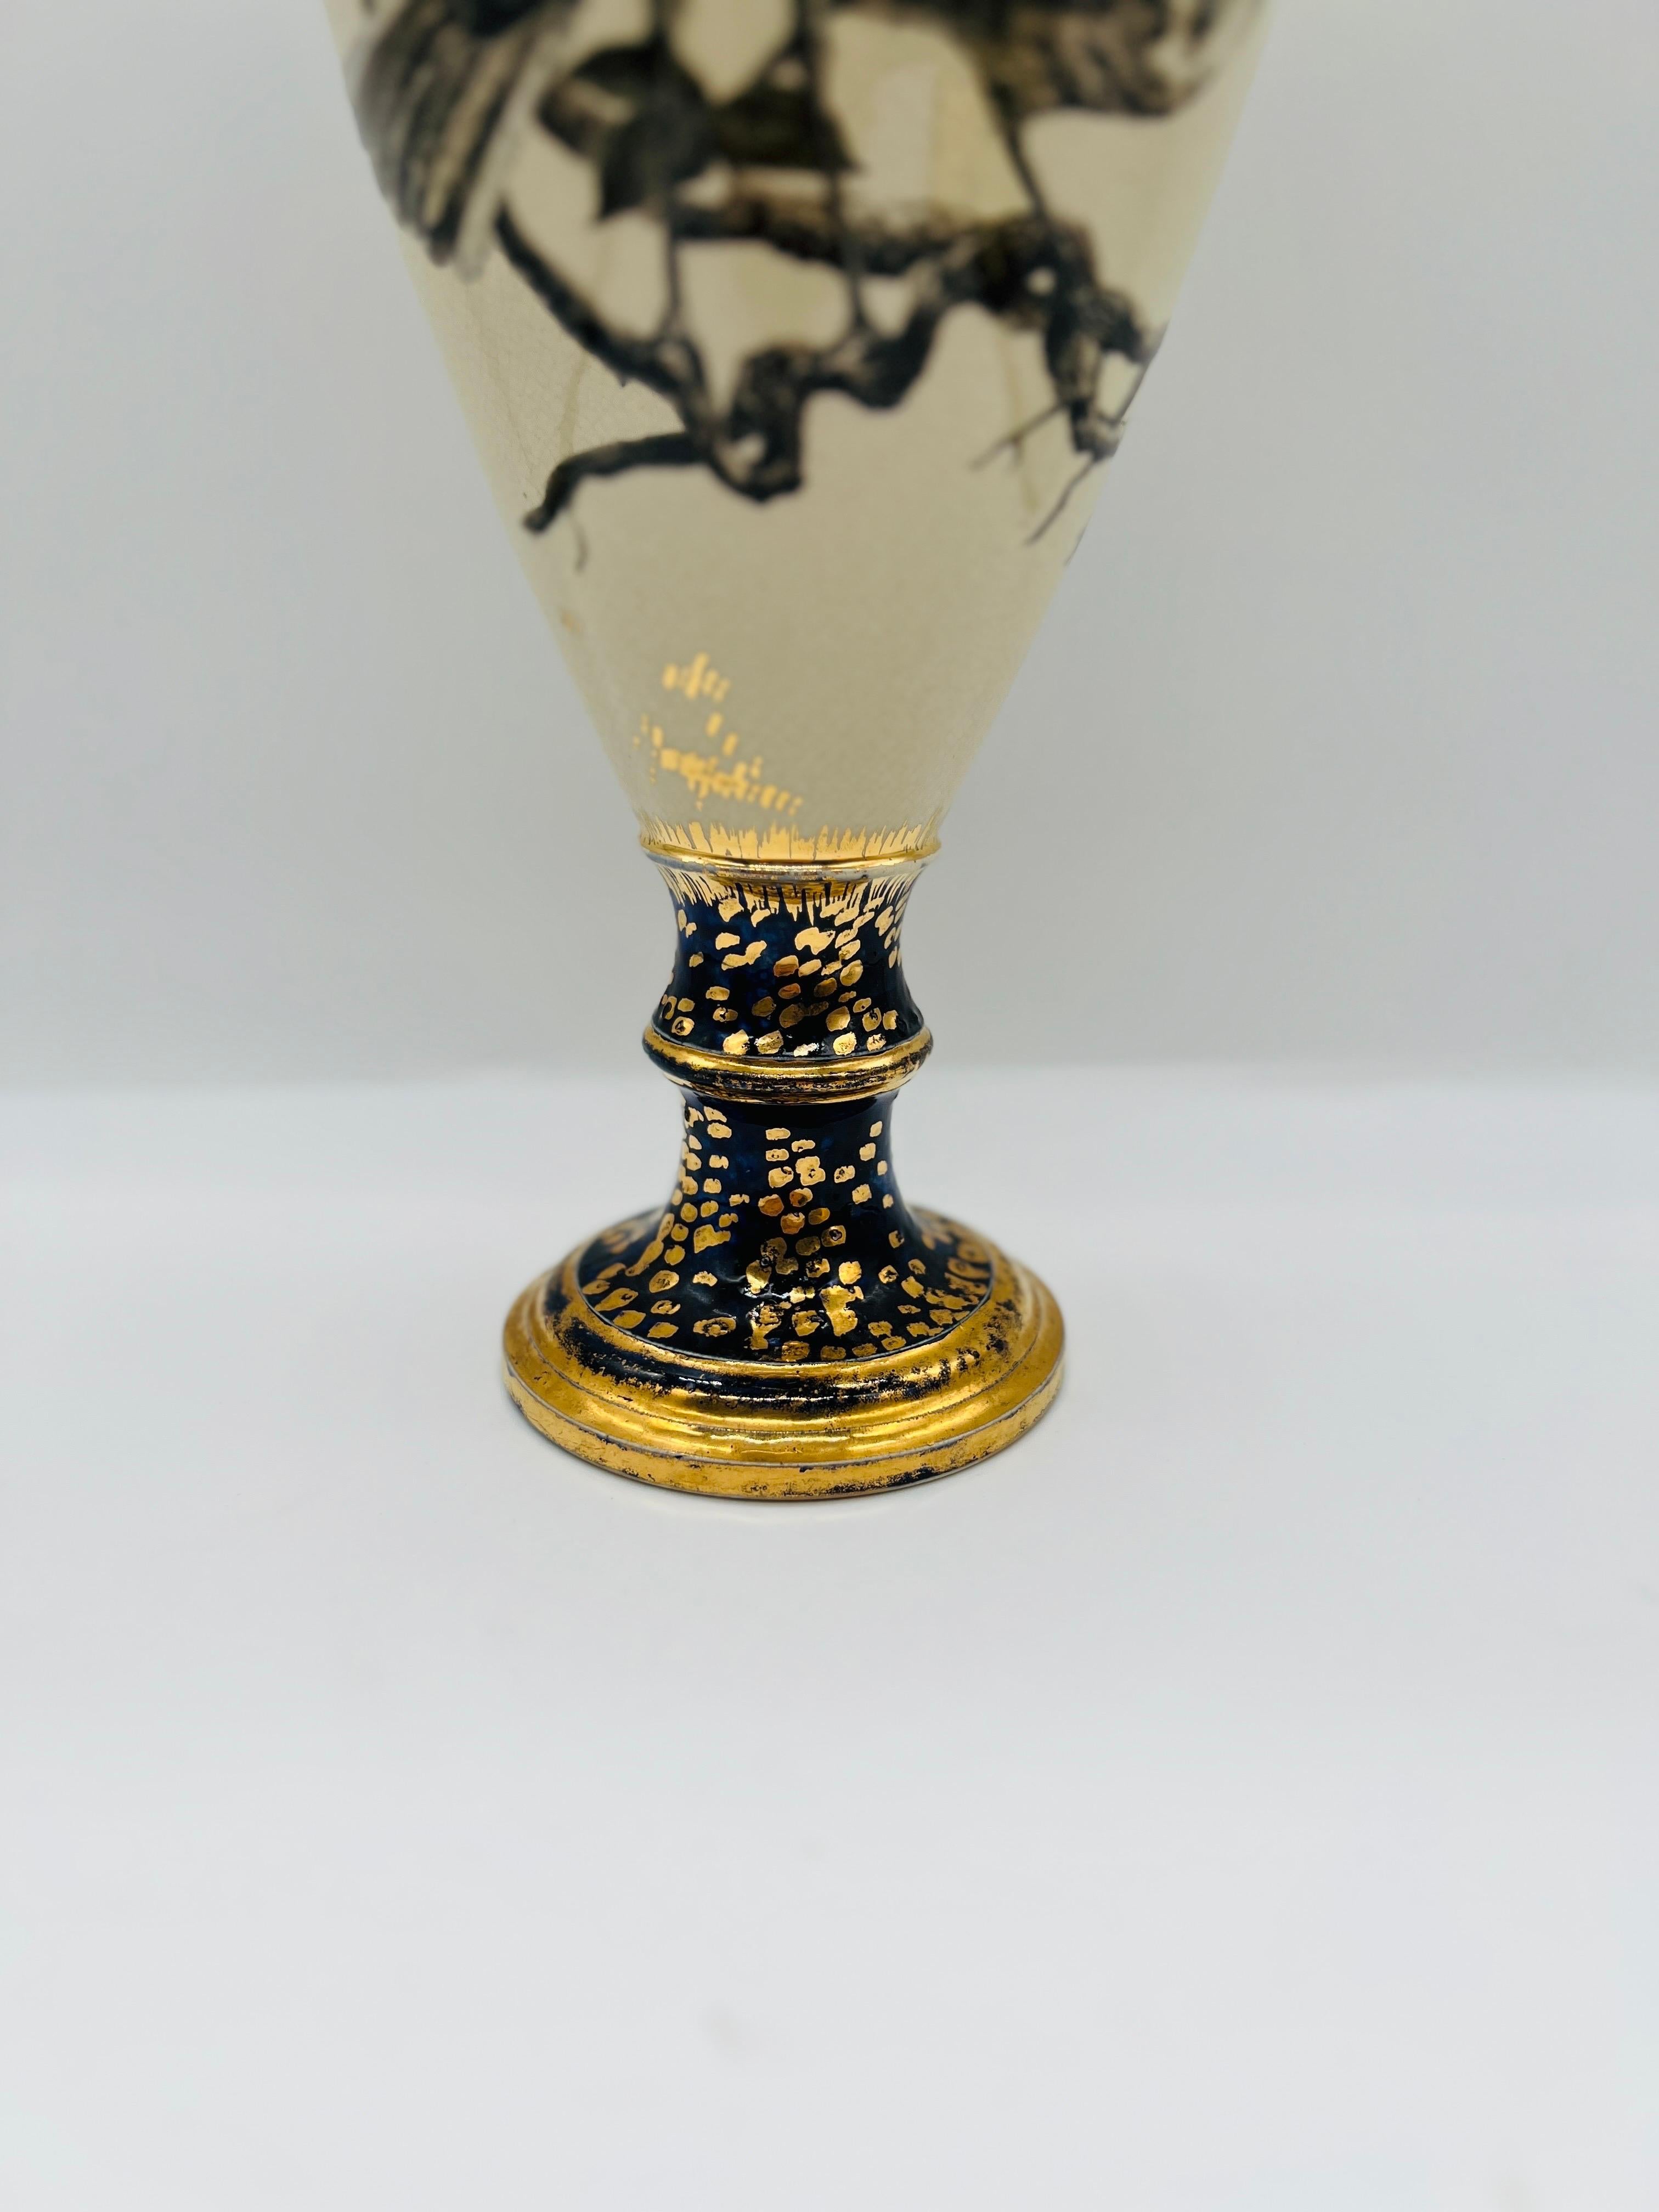 Mrs. Fannie M Banks For Cincinnati Pottery Club (American, 19th century) Circa 1879.

An antique 19th century vase by Mrs. Fannie M Banks. The vase made of porcelain has cobalt detailing to base and stem with gilt detailing throughout. The main body